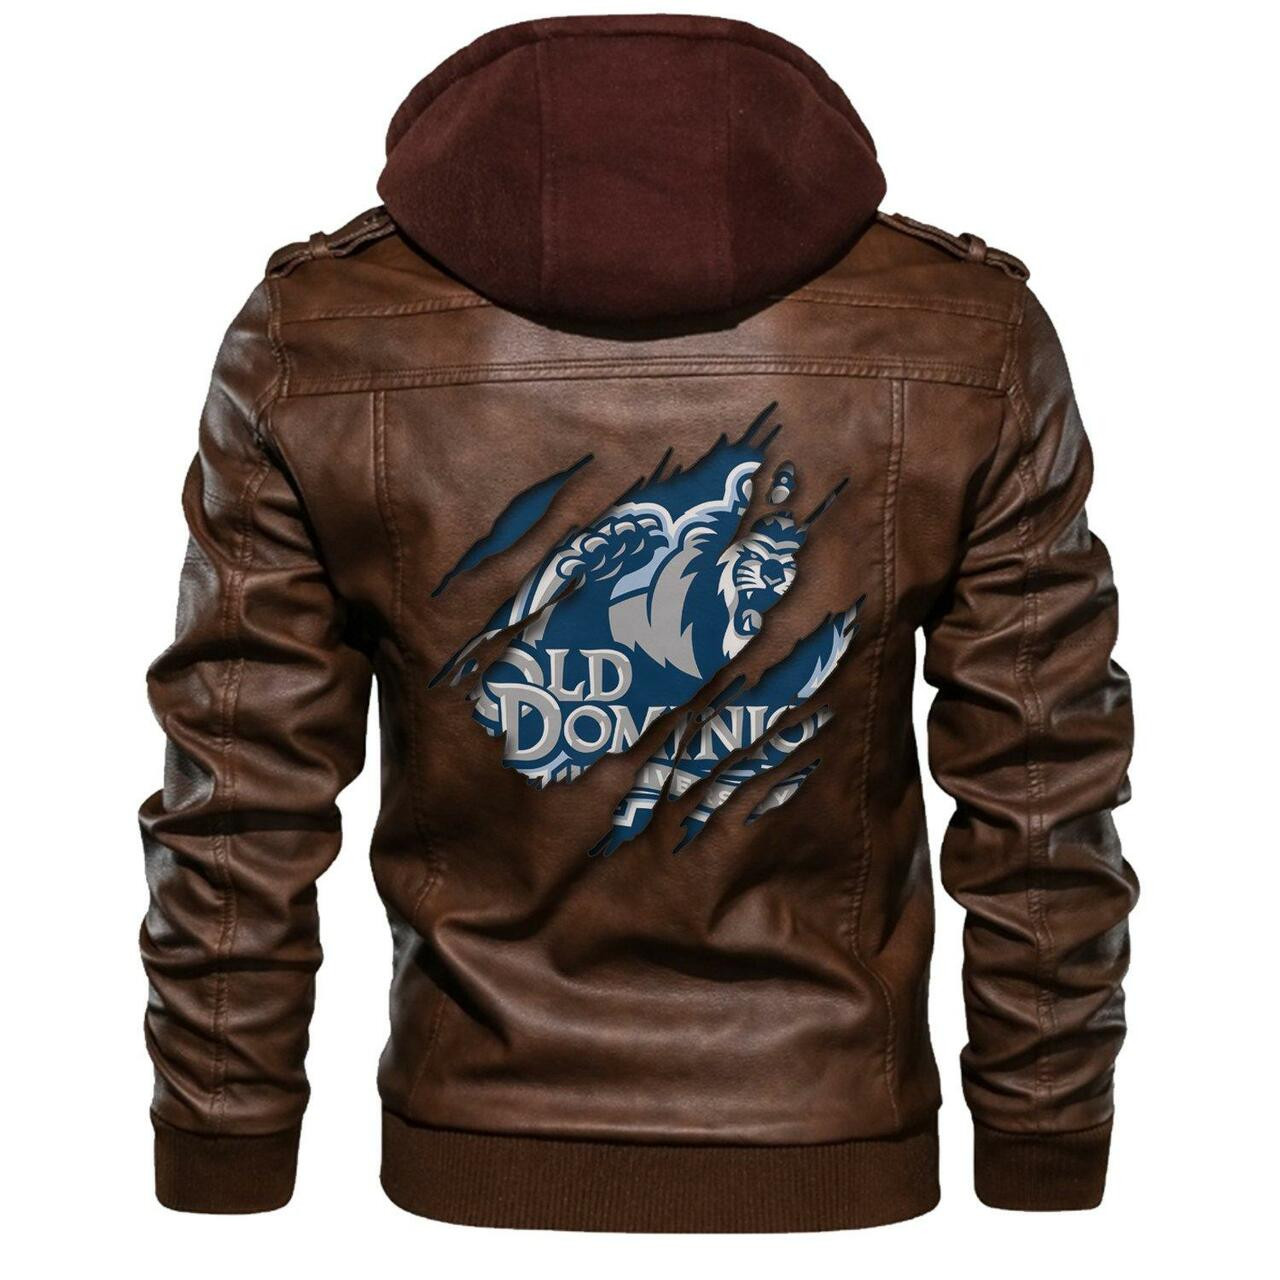 Discover our latest Leather Jacket today 26